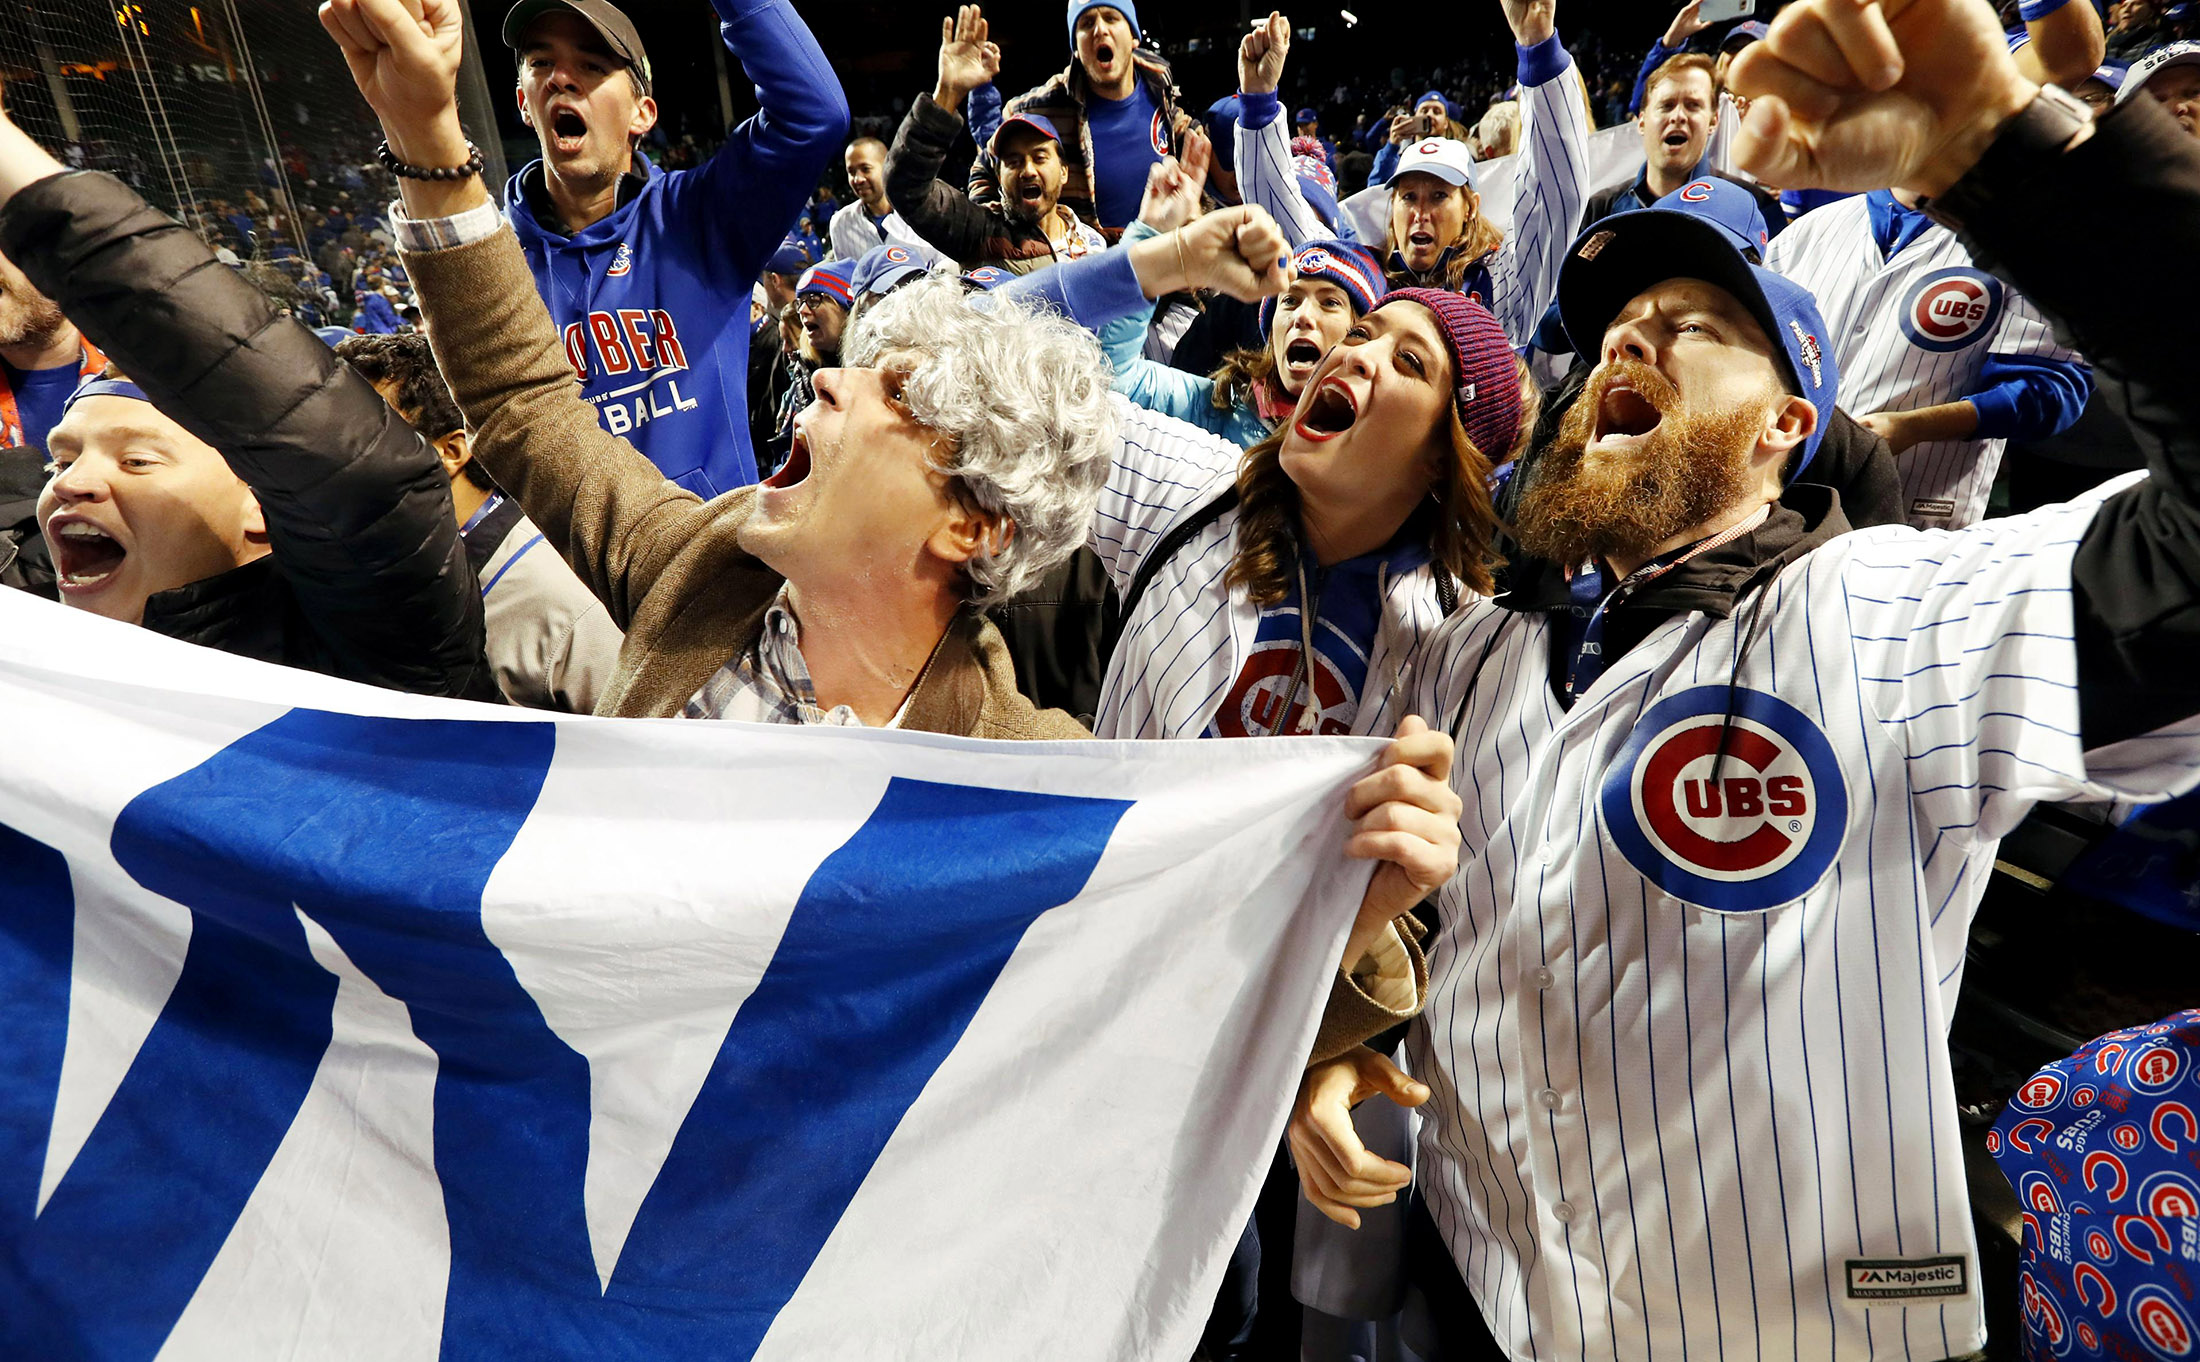 Cubs fans celebrate the team's World Series Game 5 victory at Wrigley Field in Chicago on Sunday.
